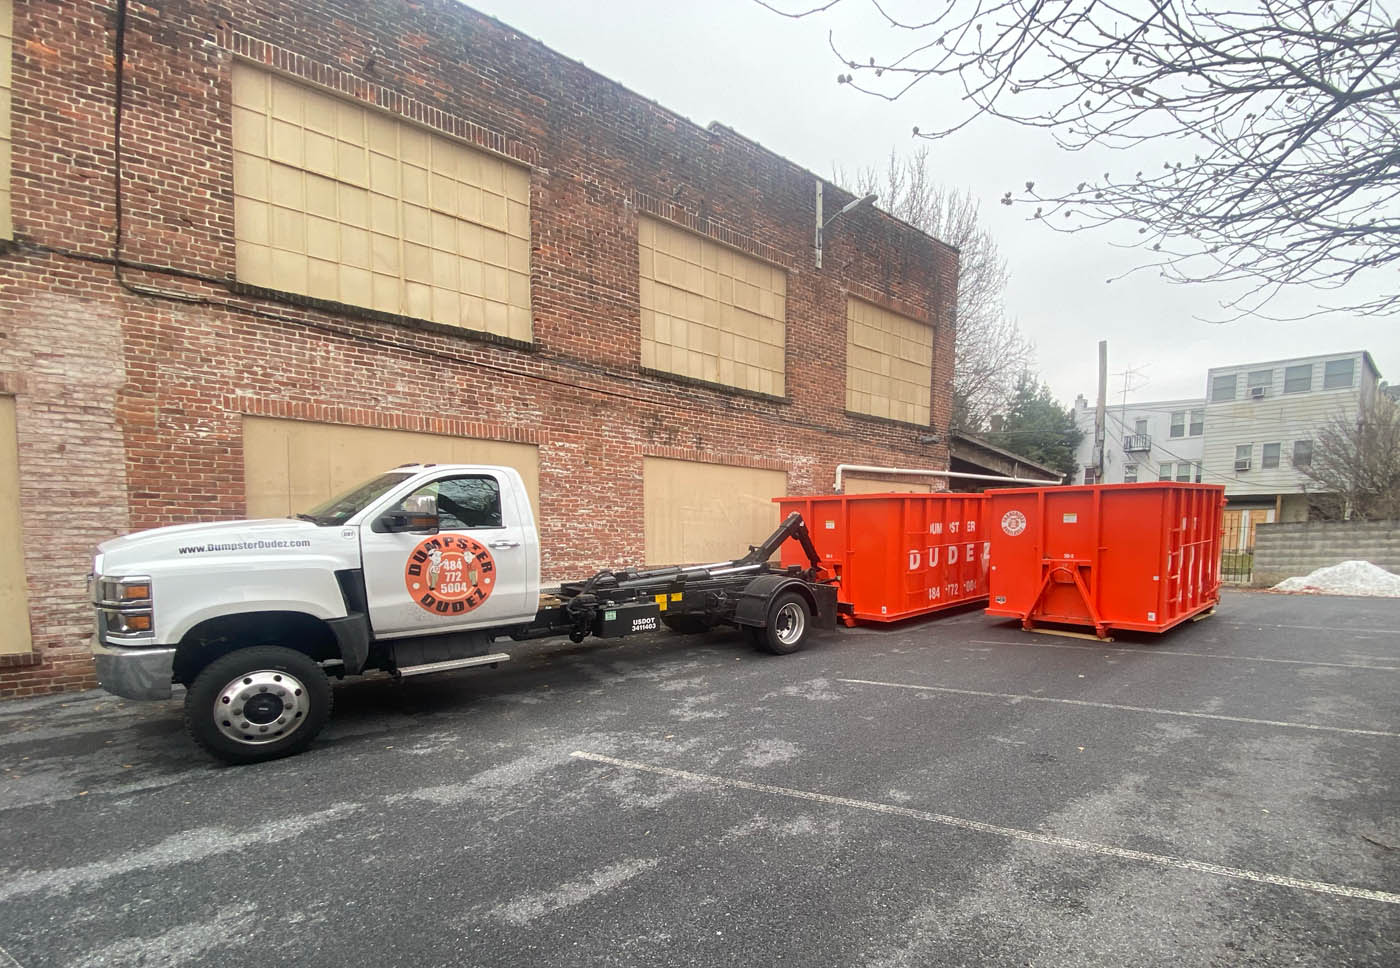 
				A small, white, Rochester 20 yard dumpster rental truck parked behind a commercial building.
			